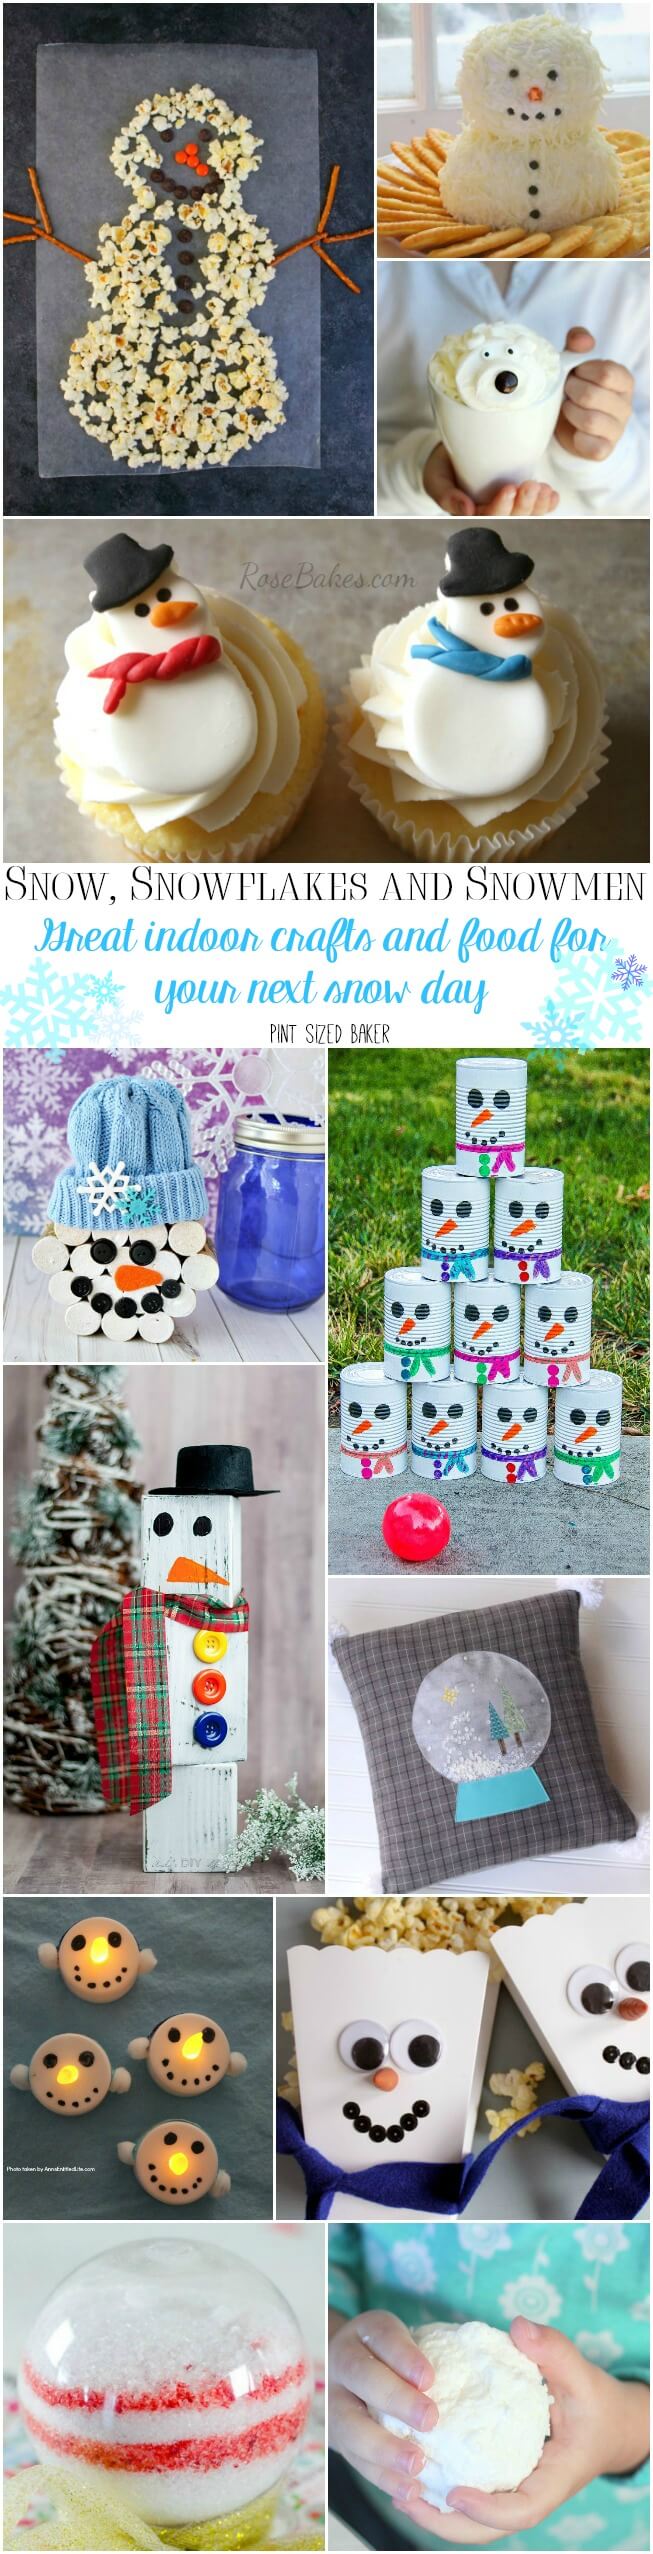 A collection of snow, snowflakes and snowmen themed crafts and food. The great thing is that you can do all these inside the comfort of your home. 